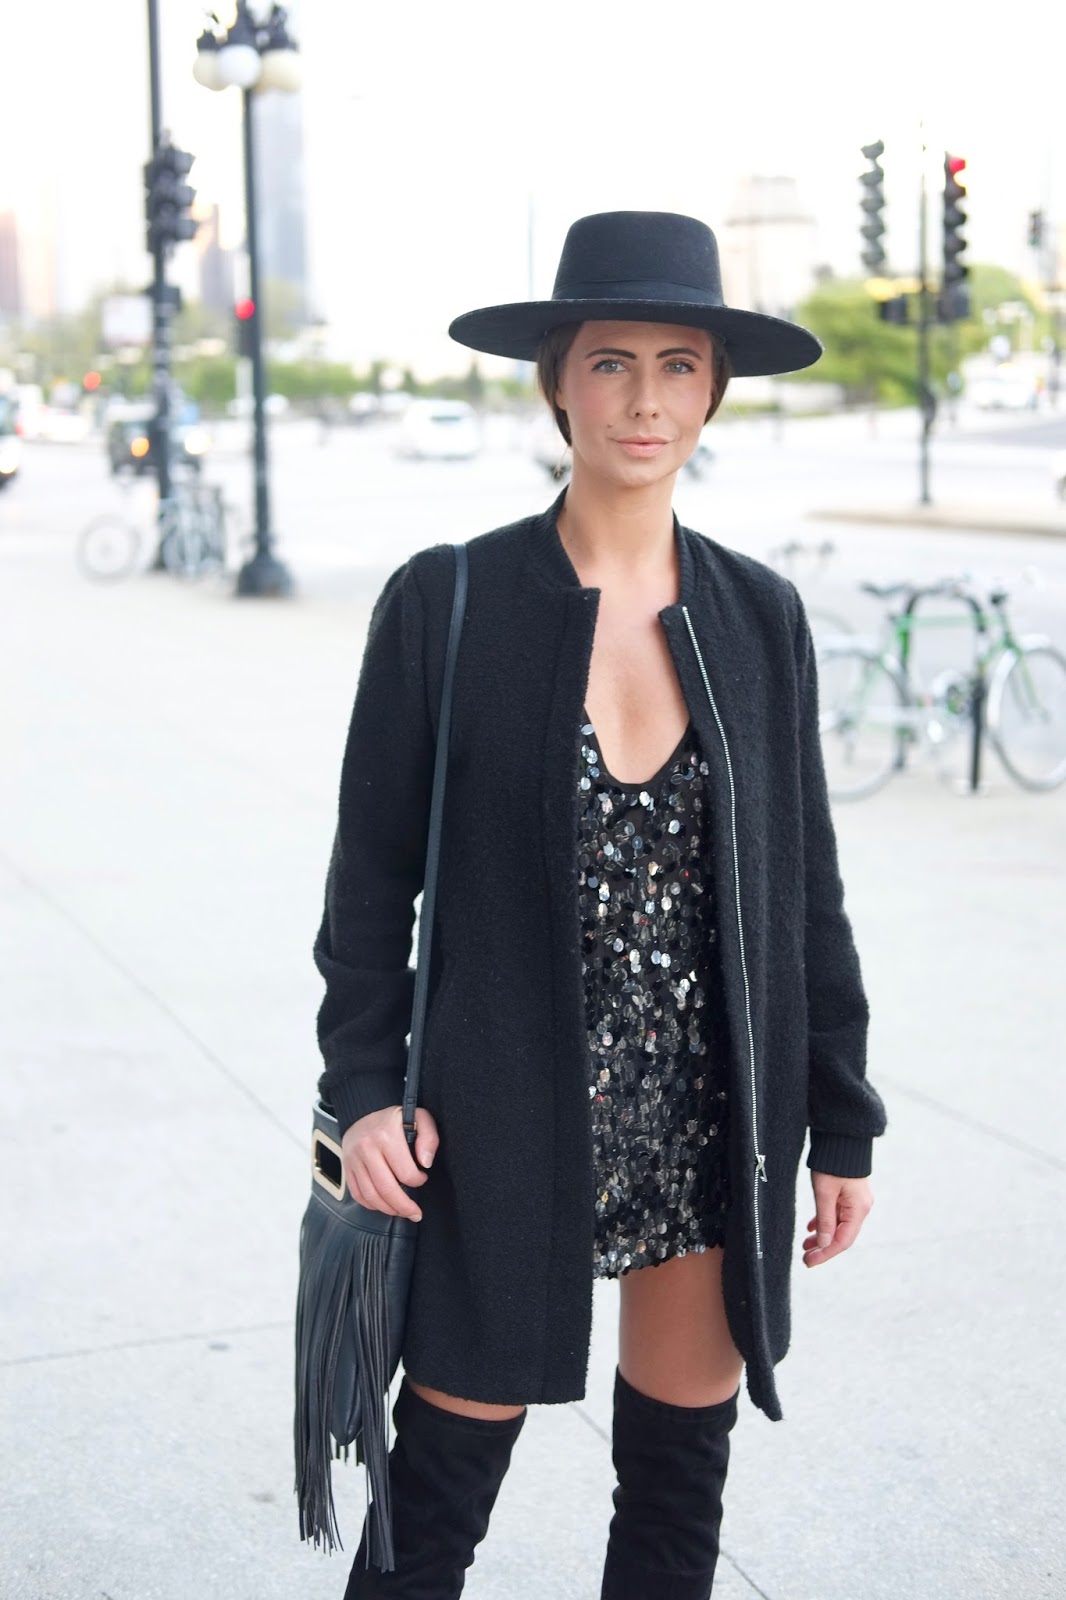 Jessica Chicago Looks A Chicago Street Style Fashion Blog